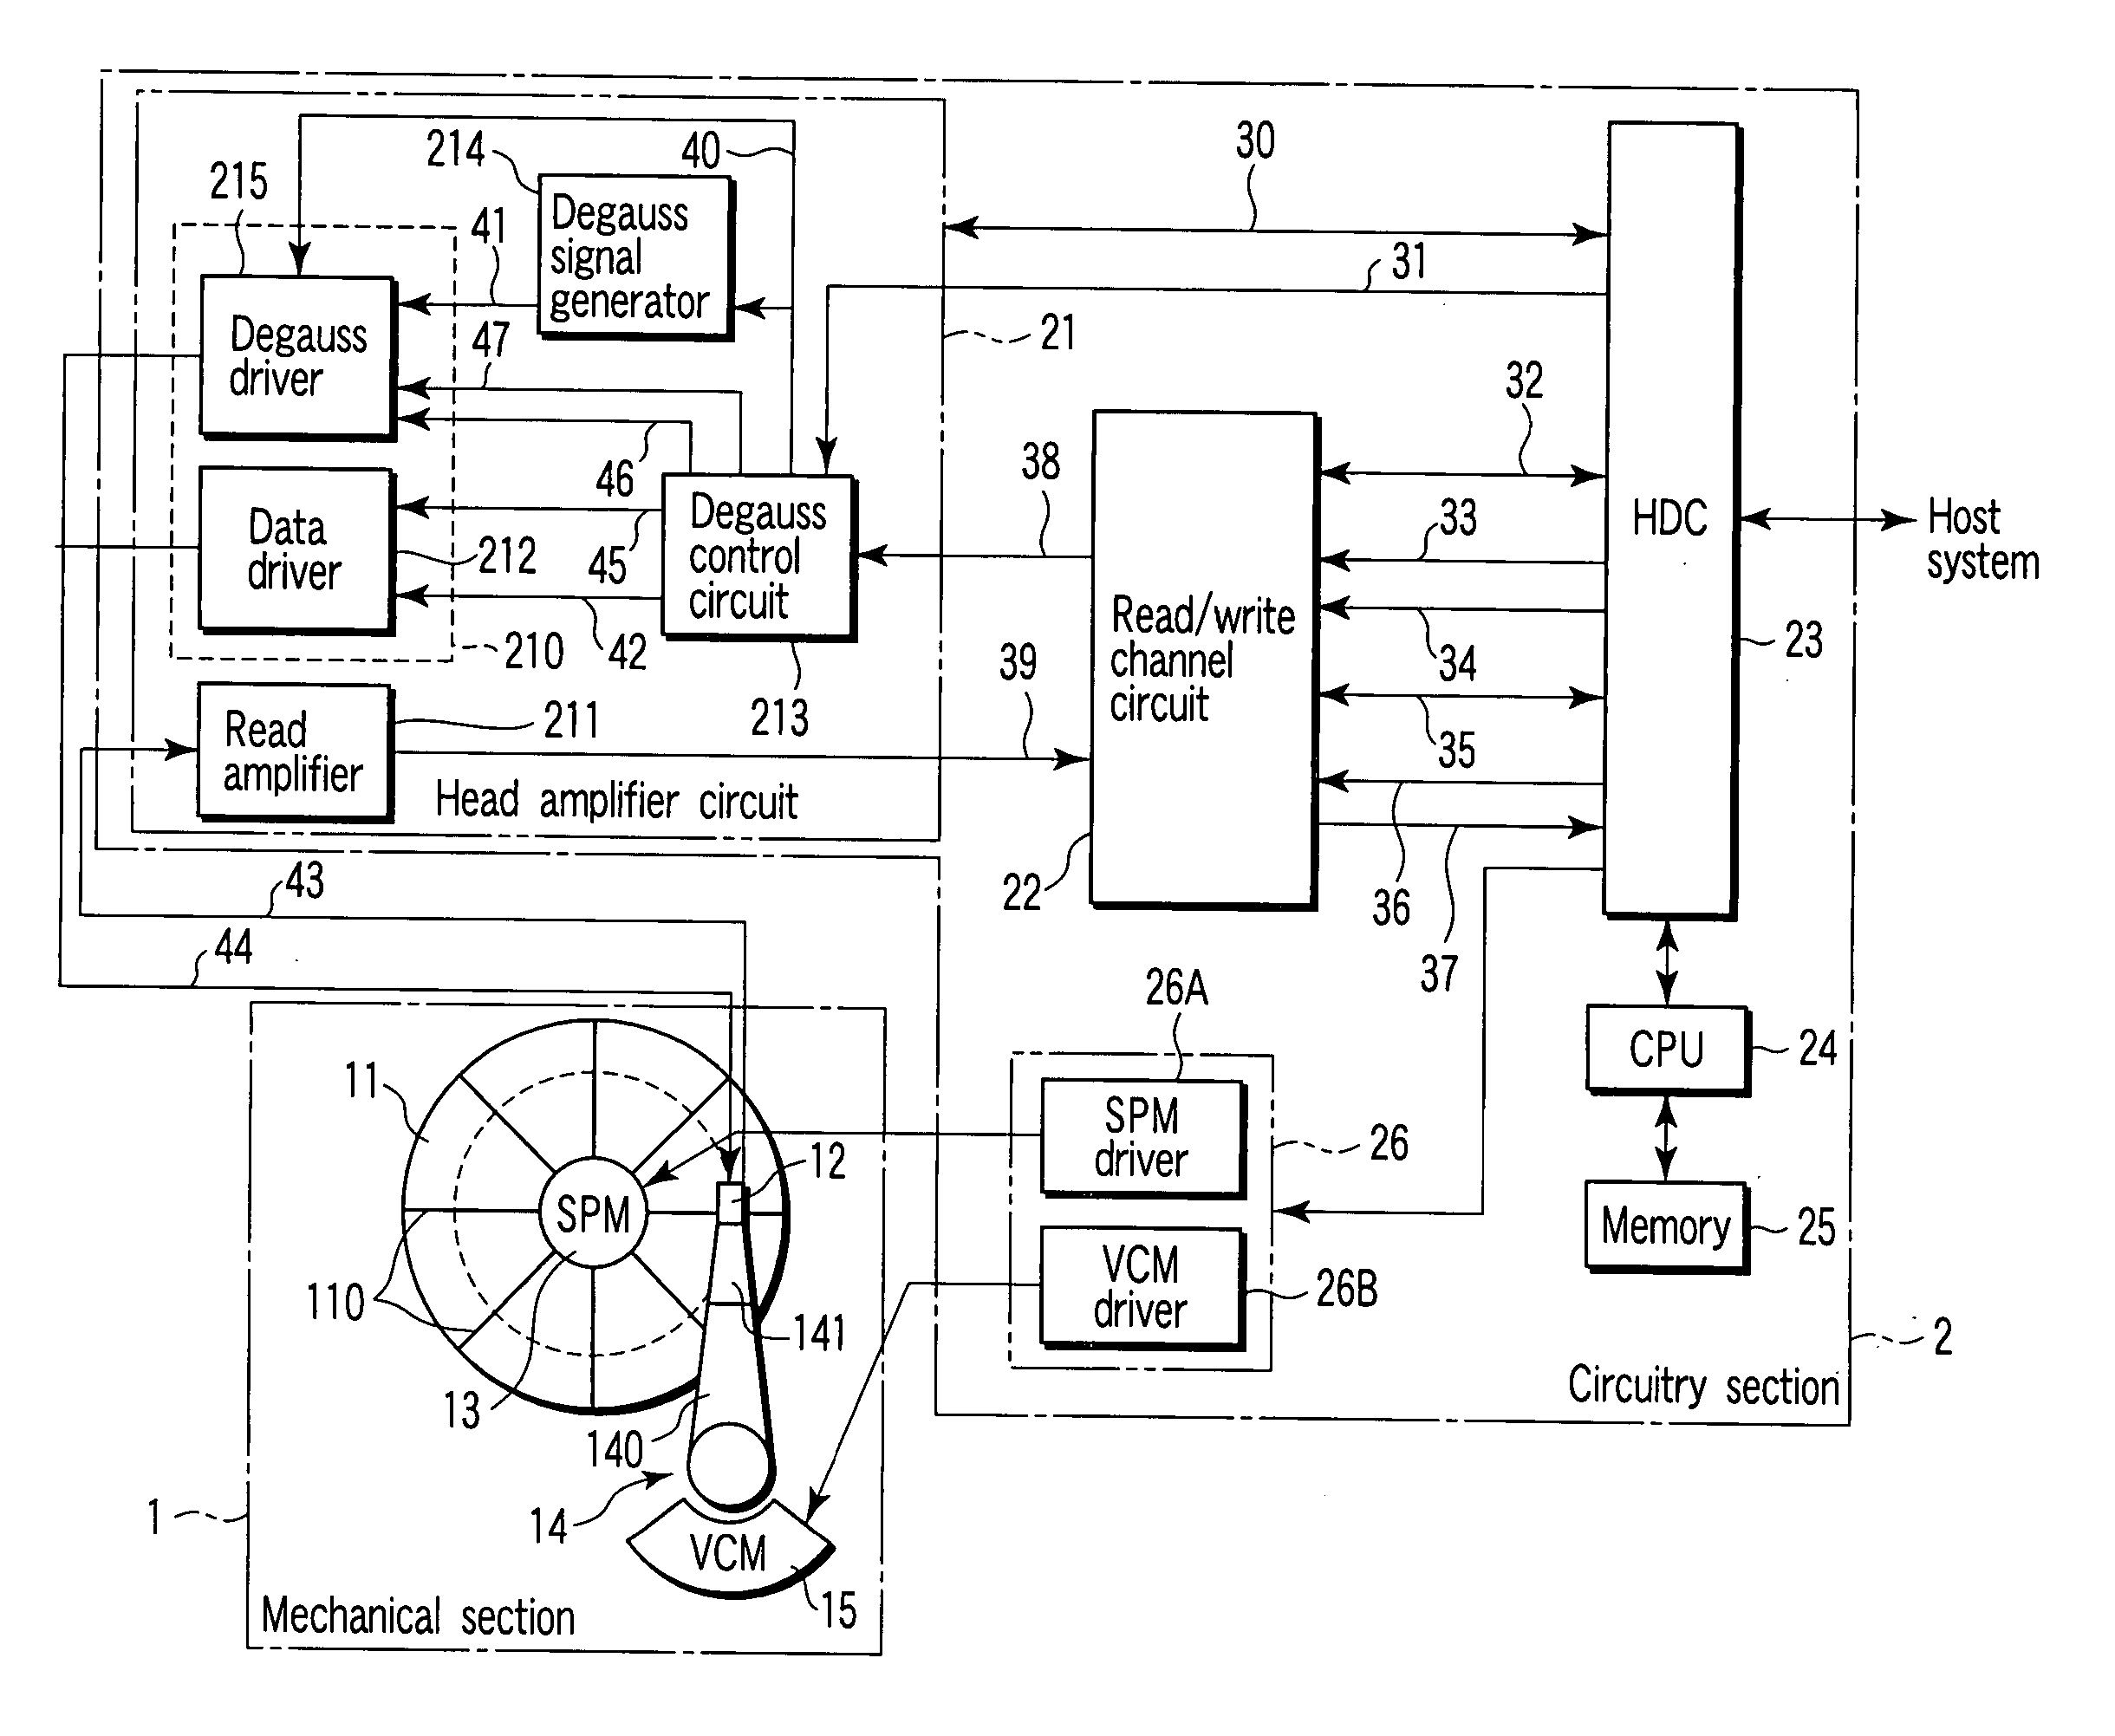 Head amplifier circuit with function for degaussing residual magnetism of recording head